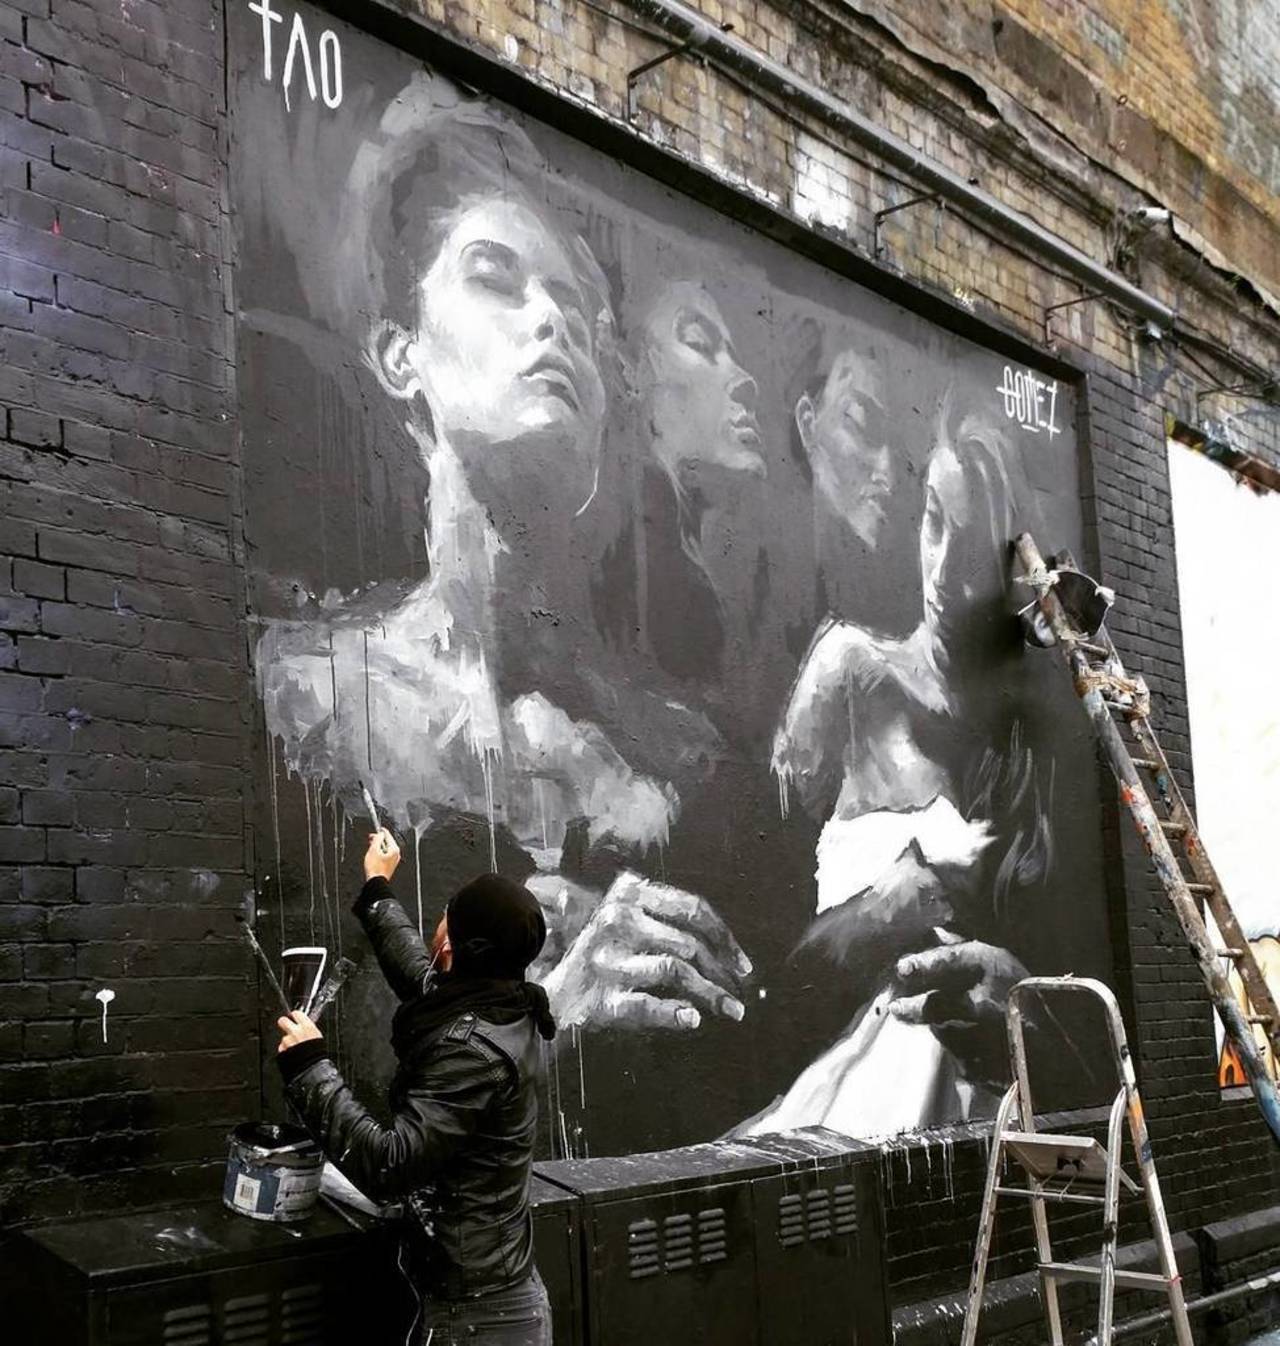 Great piece going up by #TaoGomez #StreetArt #StreetArtLondon #LondonStreetArt #London #Graffiti #GraffitiLondon #I… http://t.co/q11pvEhyW8